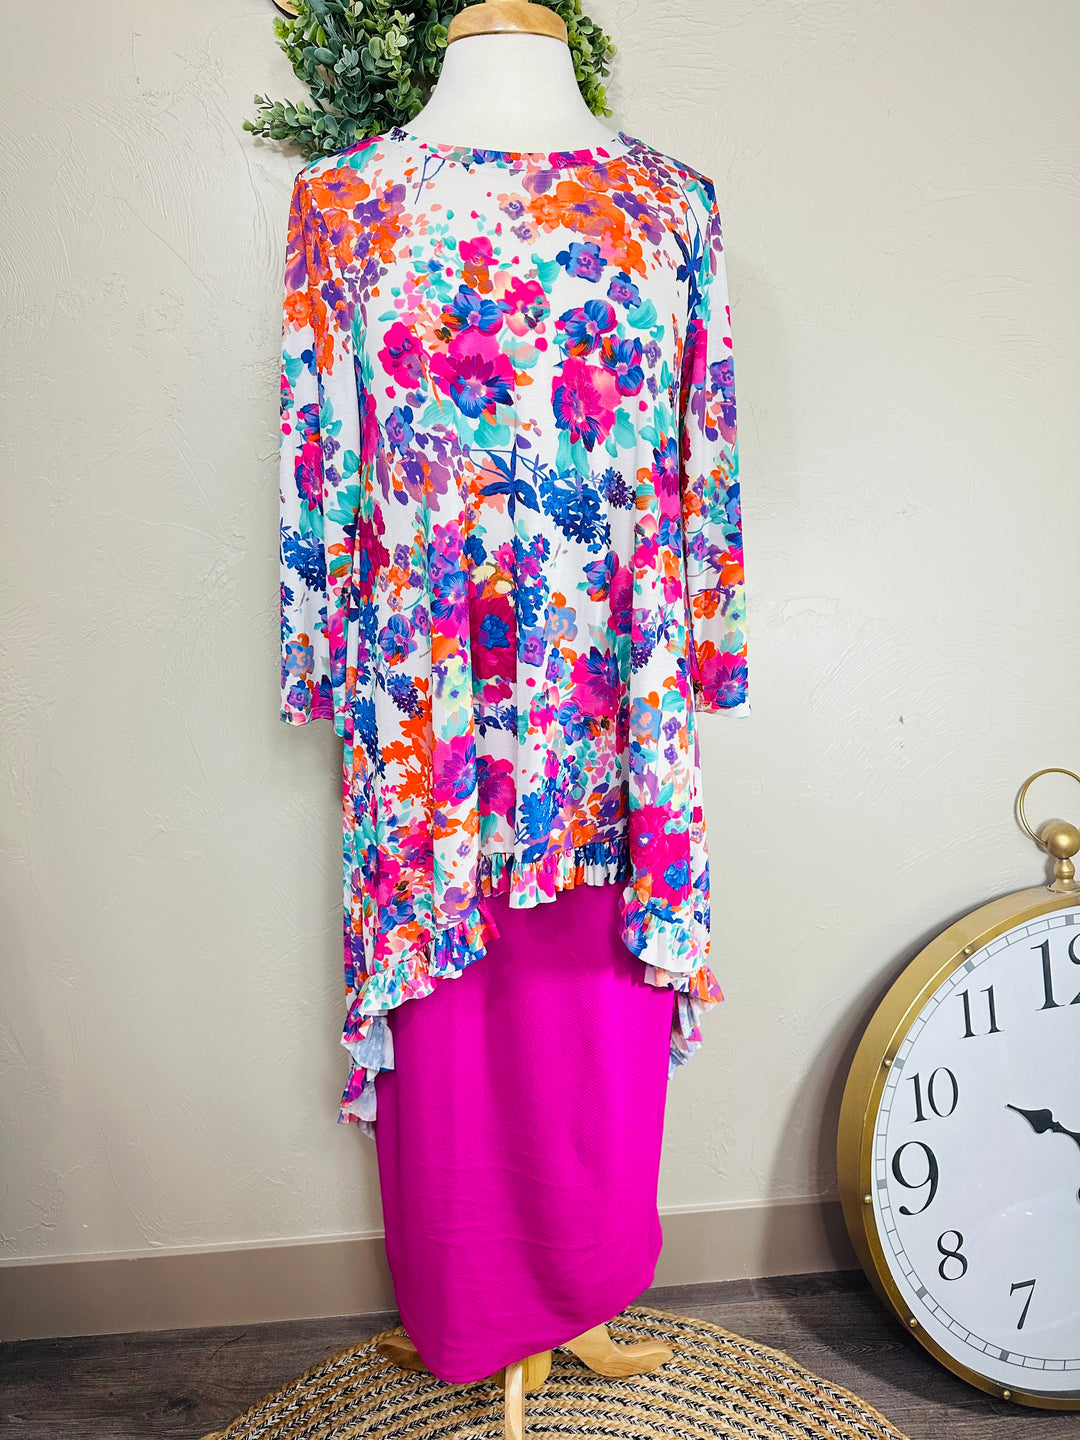 Liza Lou's Hi Low Modest Colorful Floral Top with Ruffle